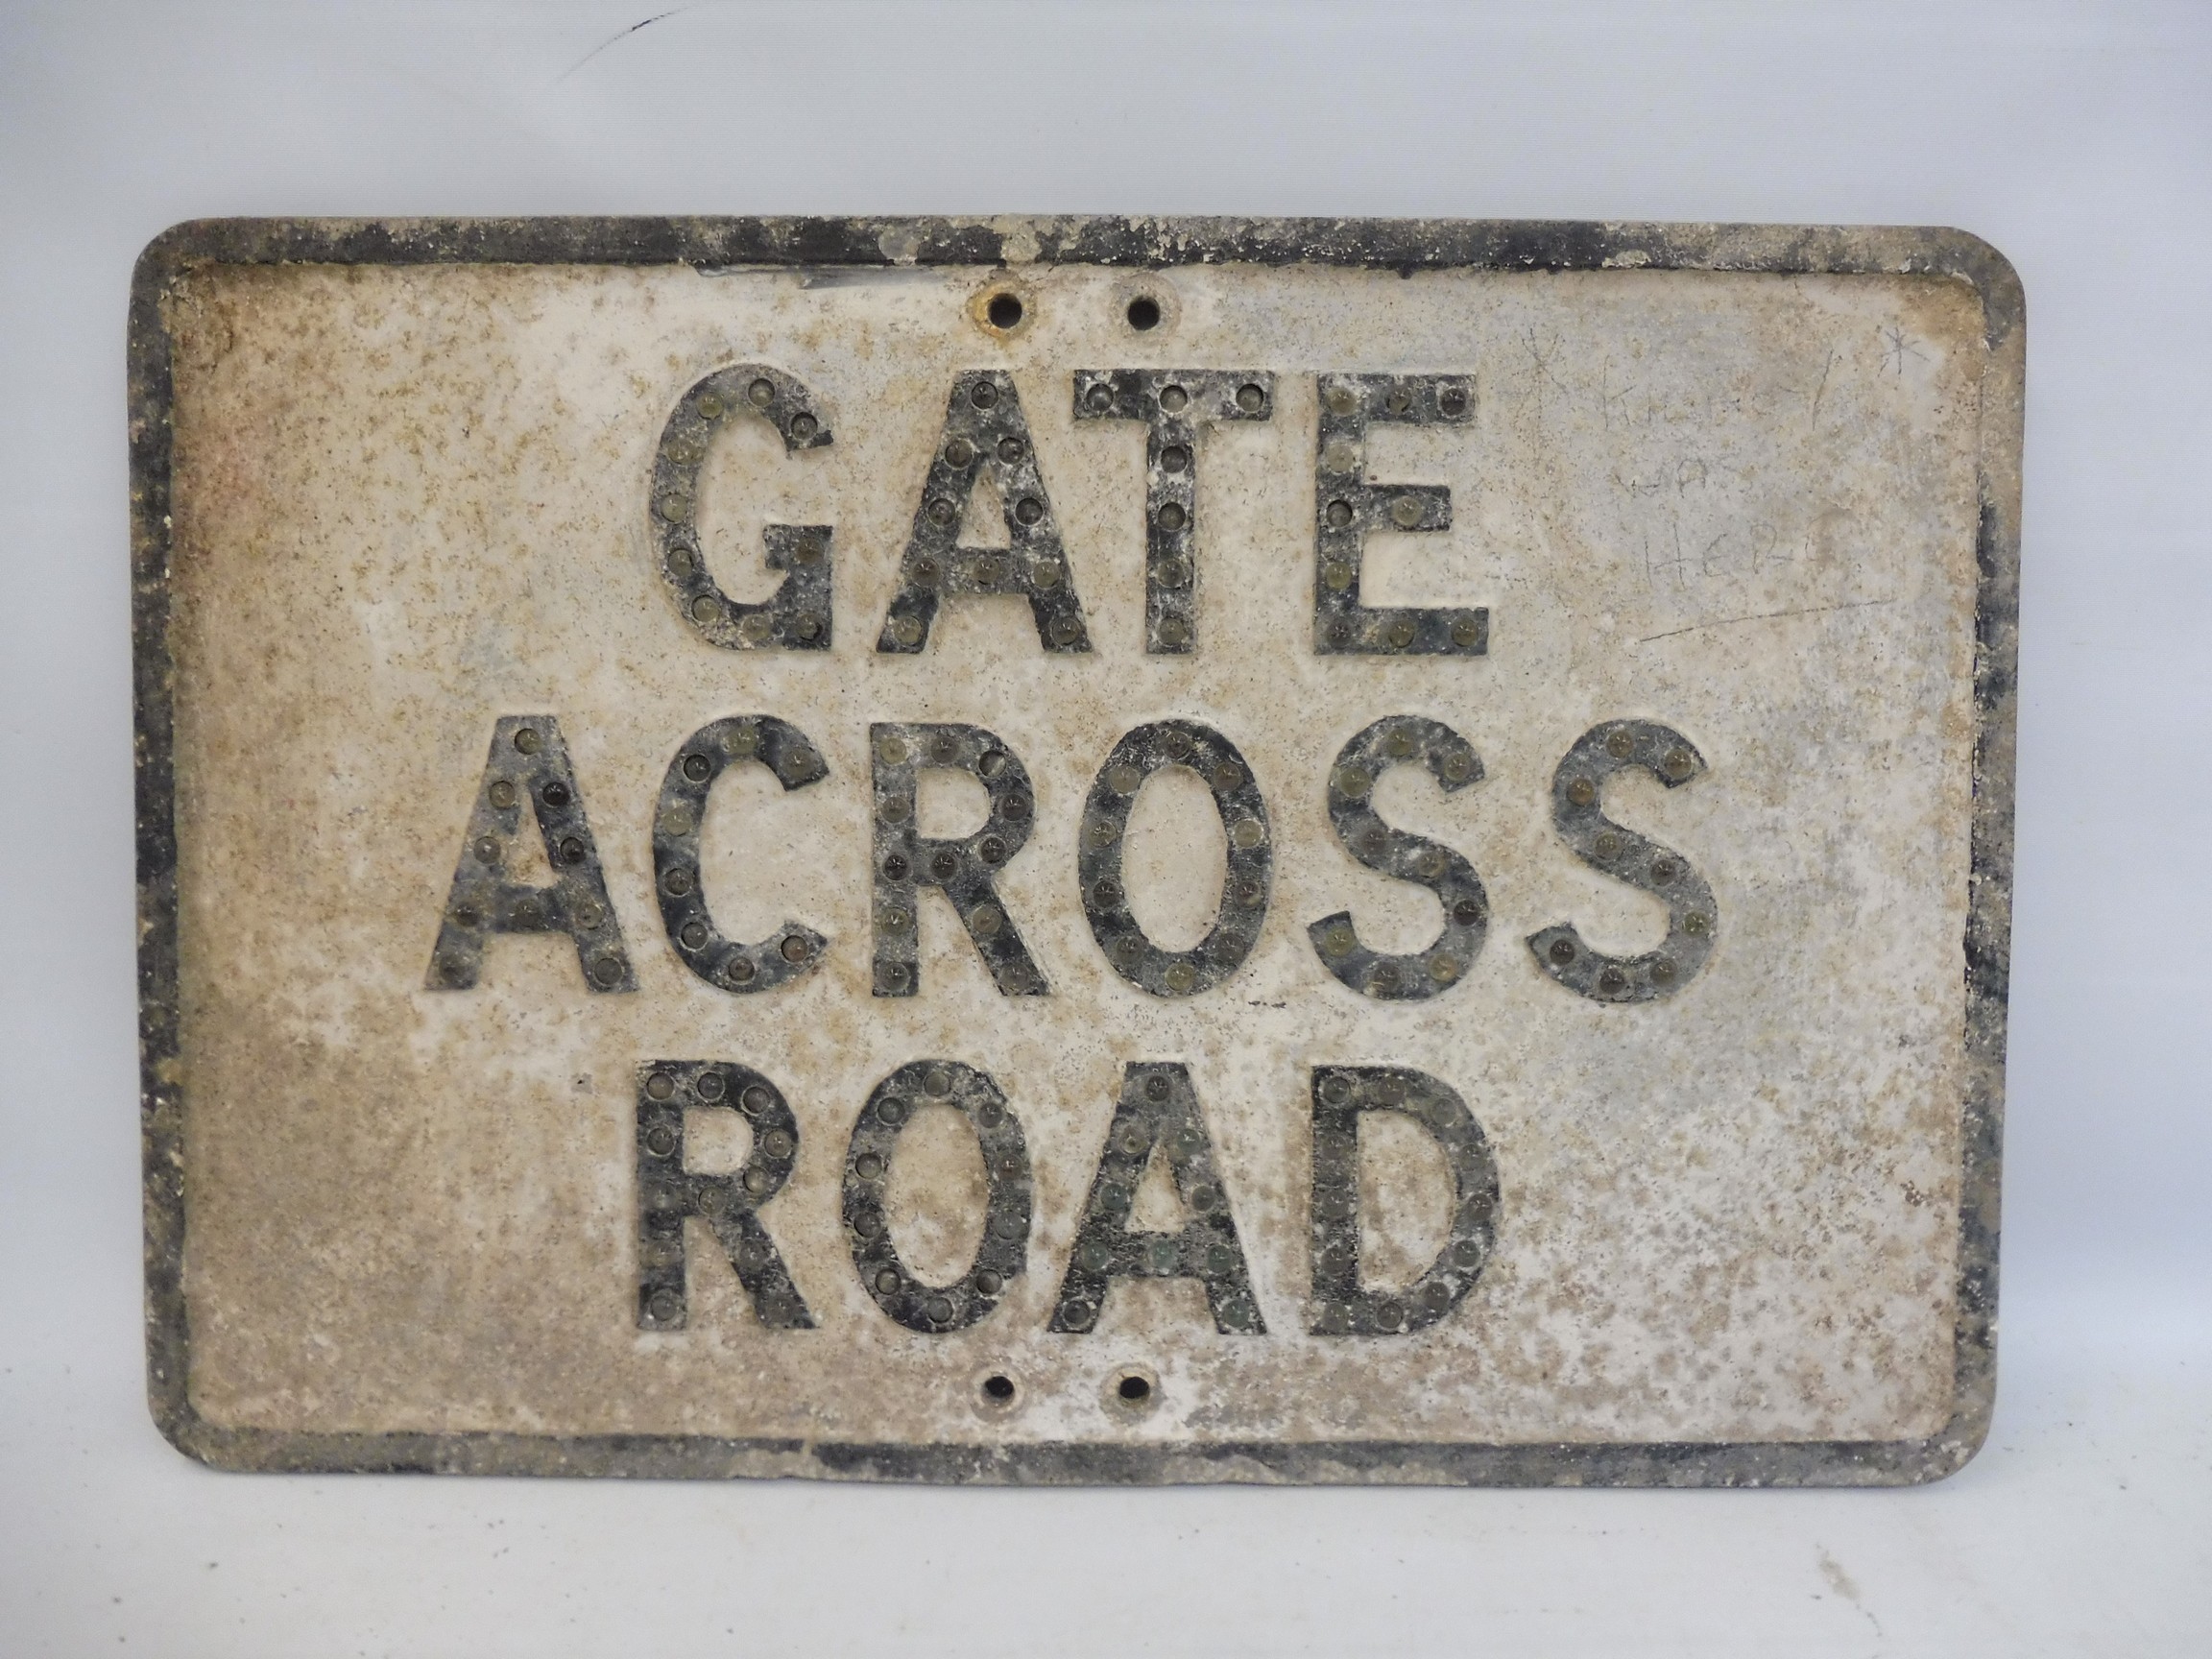 A rectangular aluminium road sign - Gate Across Road, with reflective glass beads, 21 x 14".